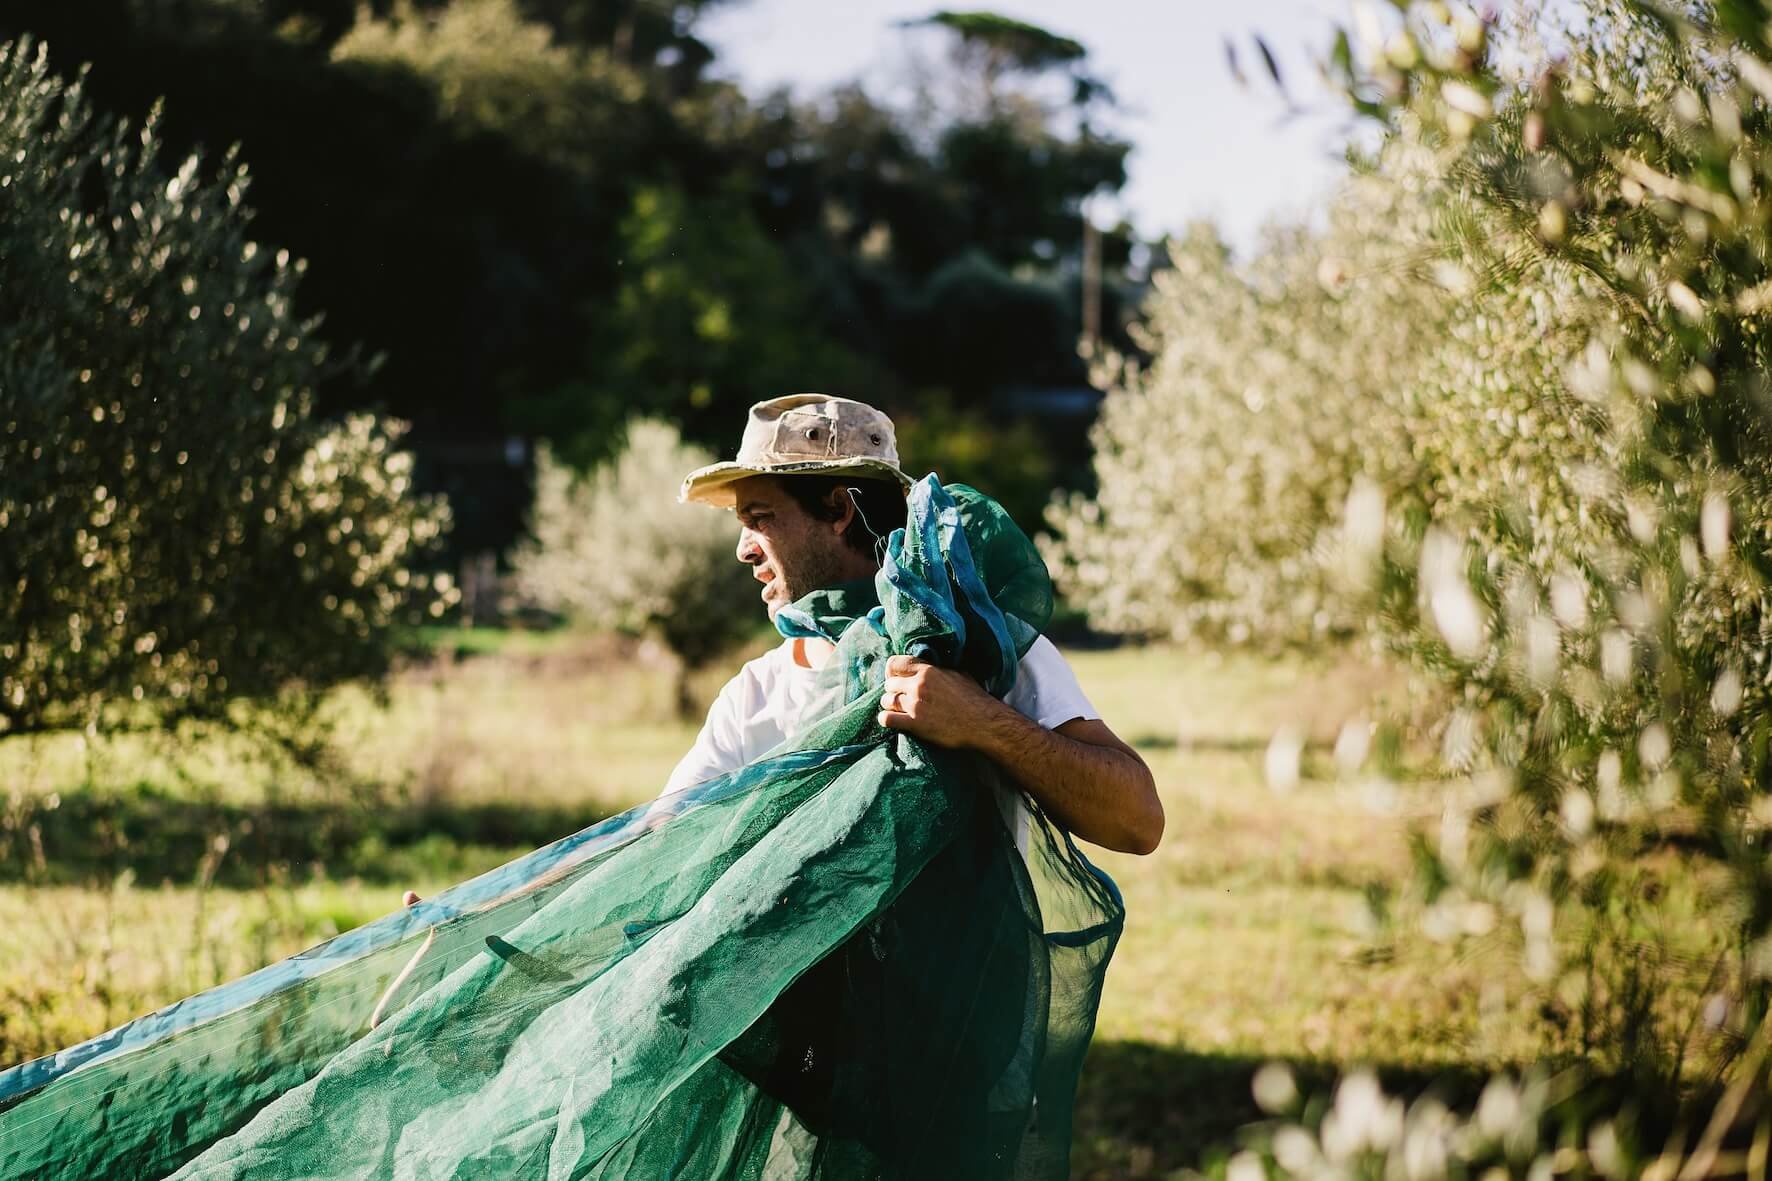 passeite farm, portugal, harvesting with nets